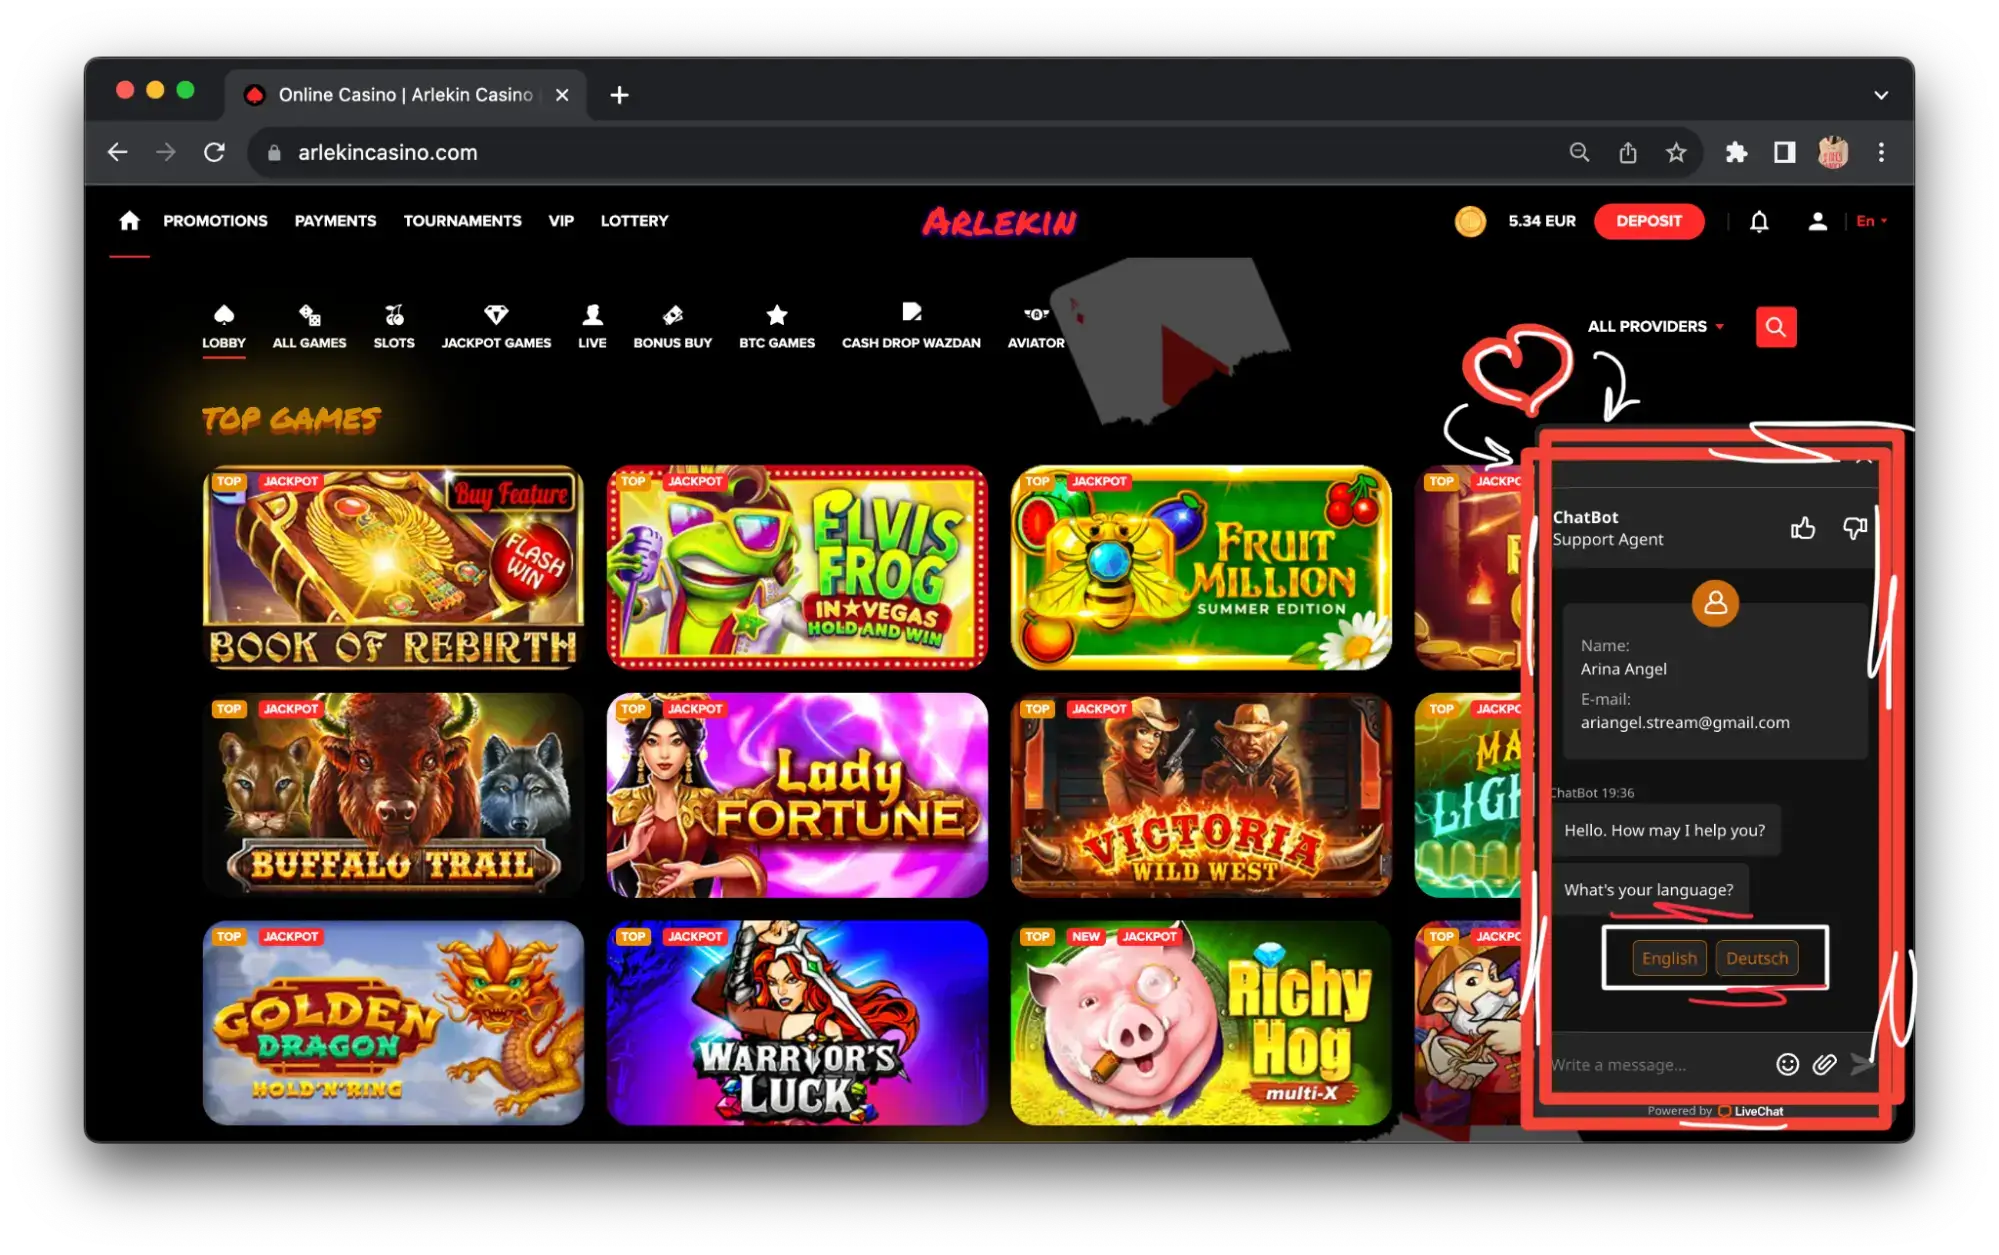 casino online ireland: technical support chat room